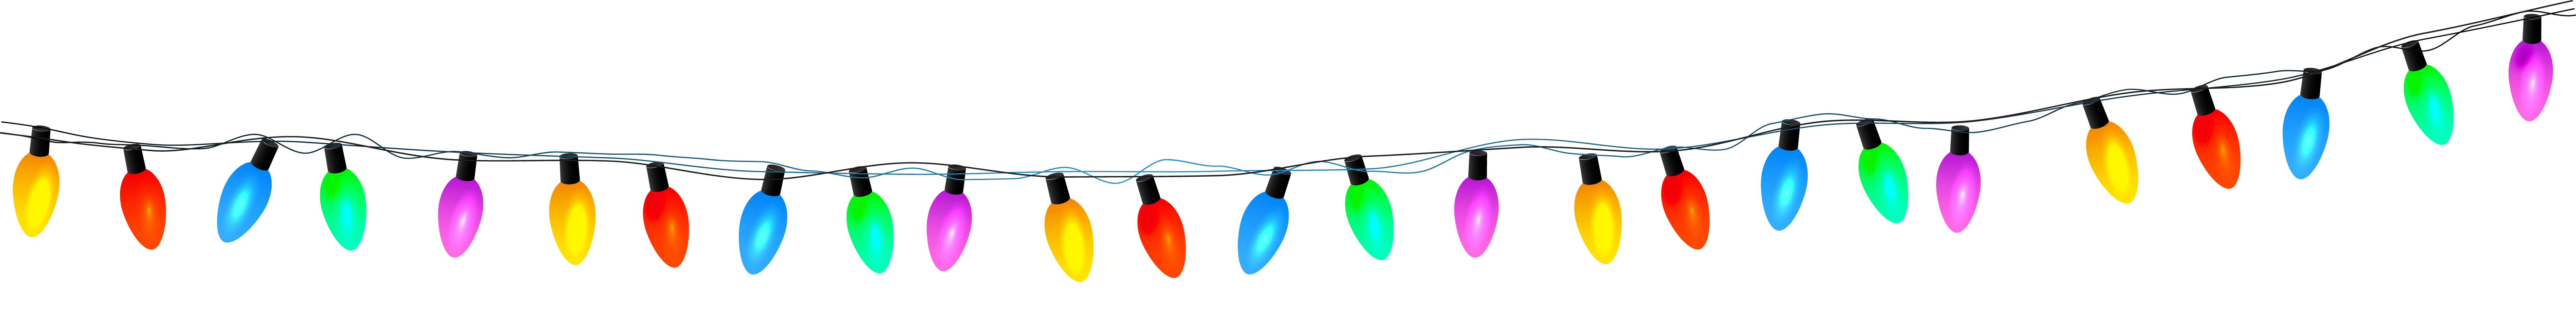 Christmas transparent png clip. Carnival clipart lights